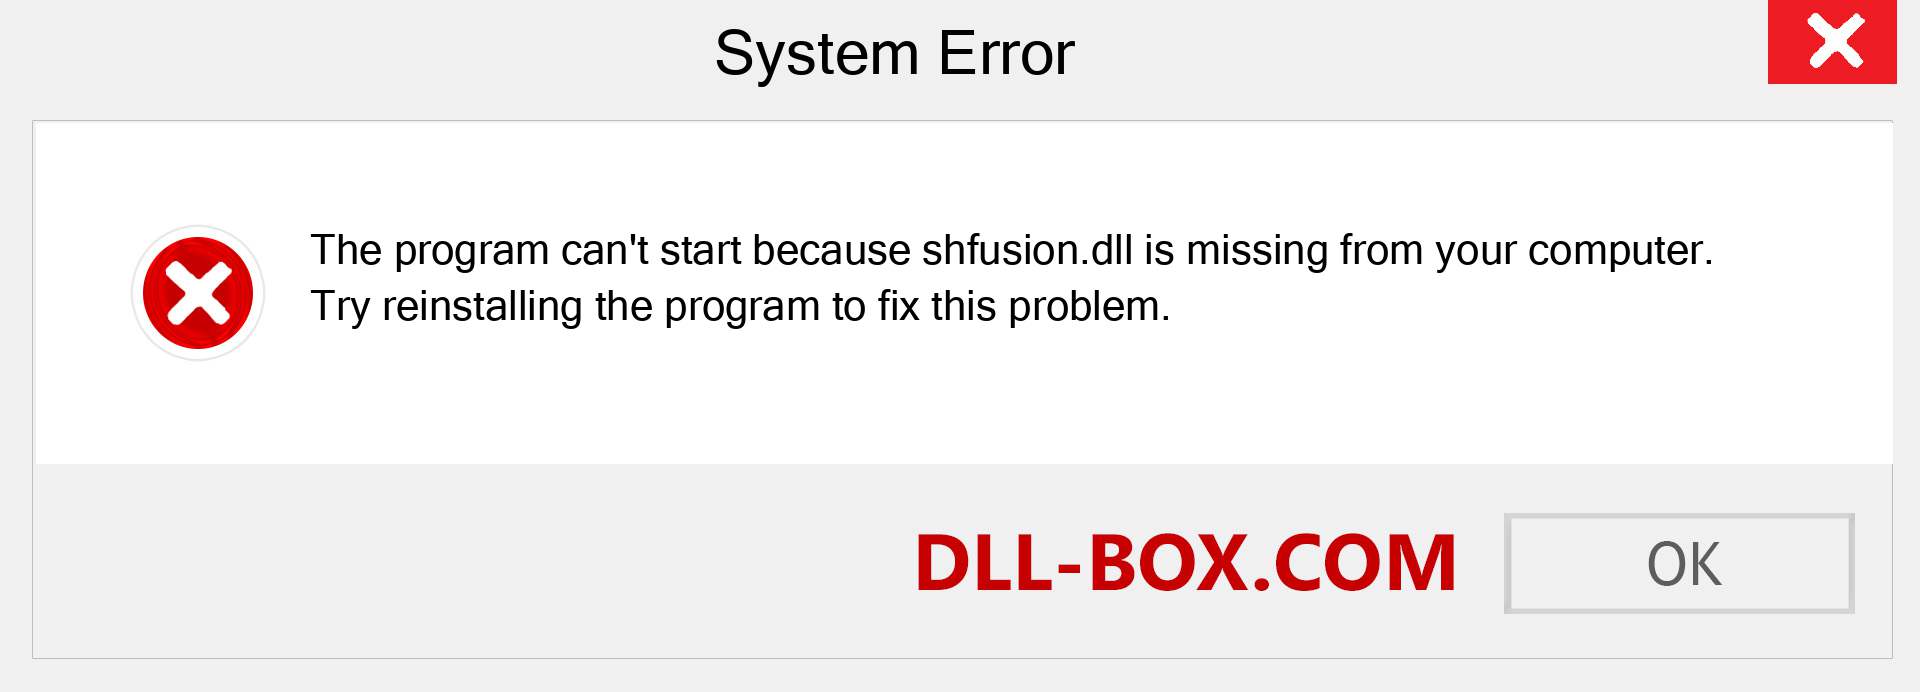  shfusion.dll file is missing?. Download for Windows 7, 8, 10 - Fix  shfusion dll Missing Error on Windows, photos, images